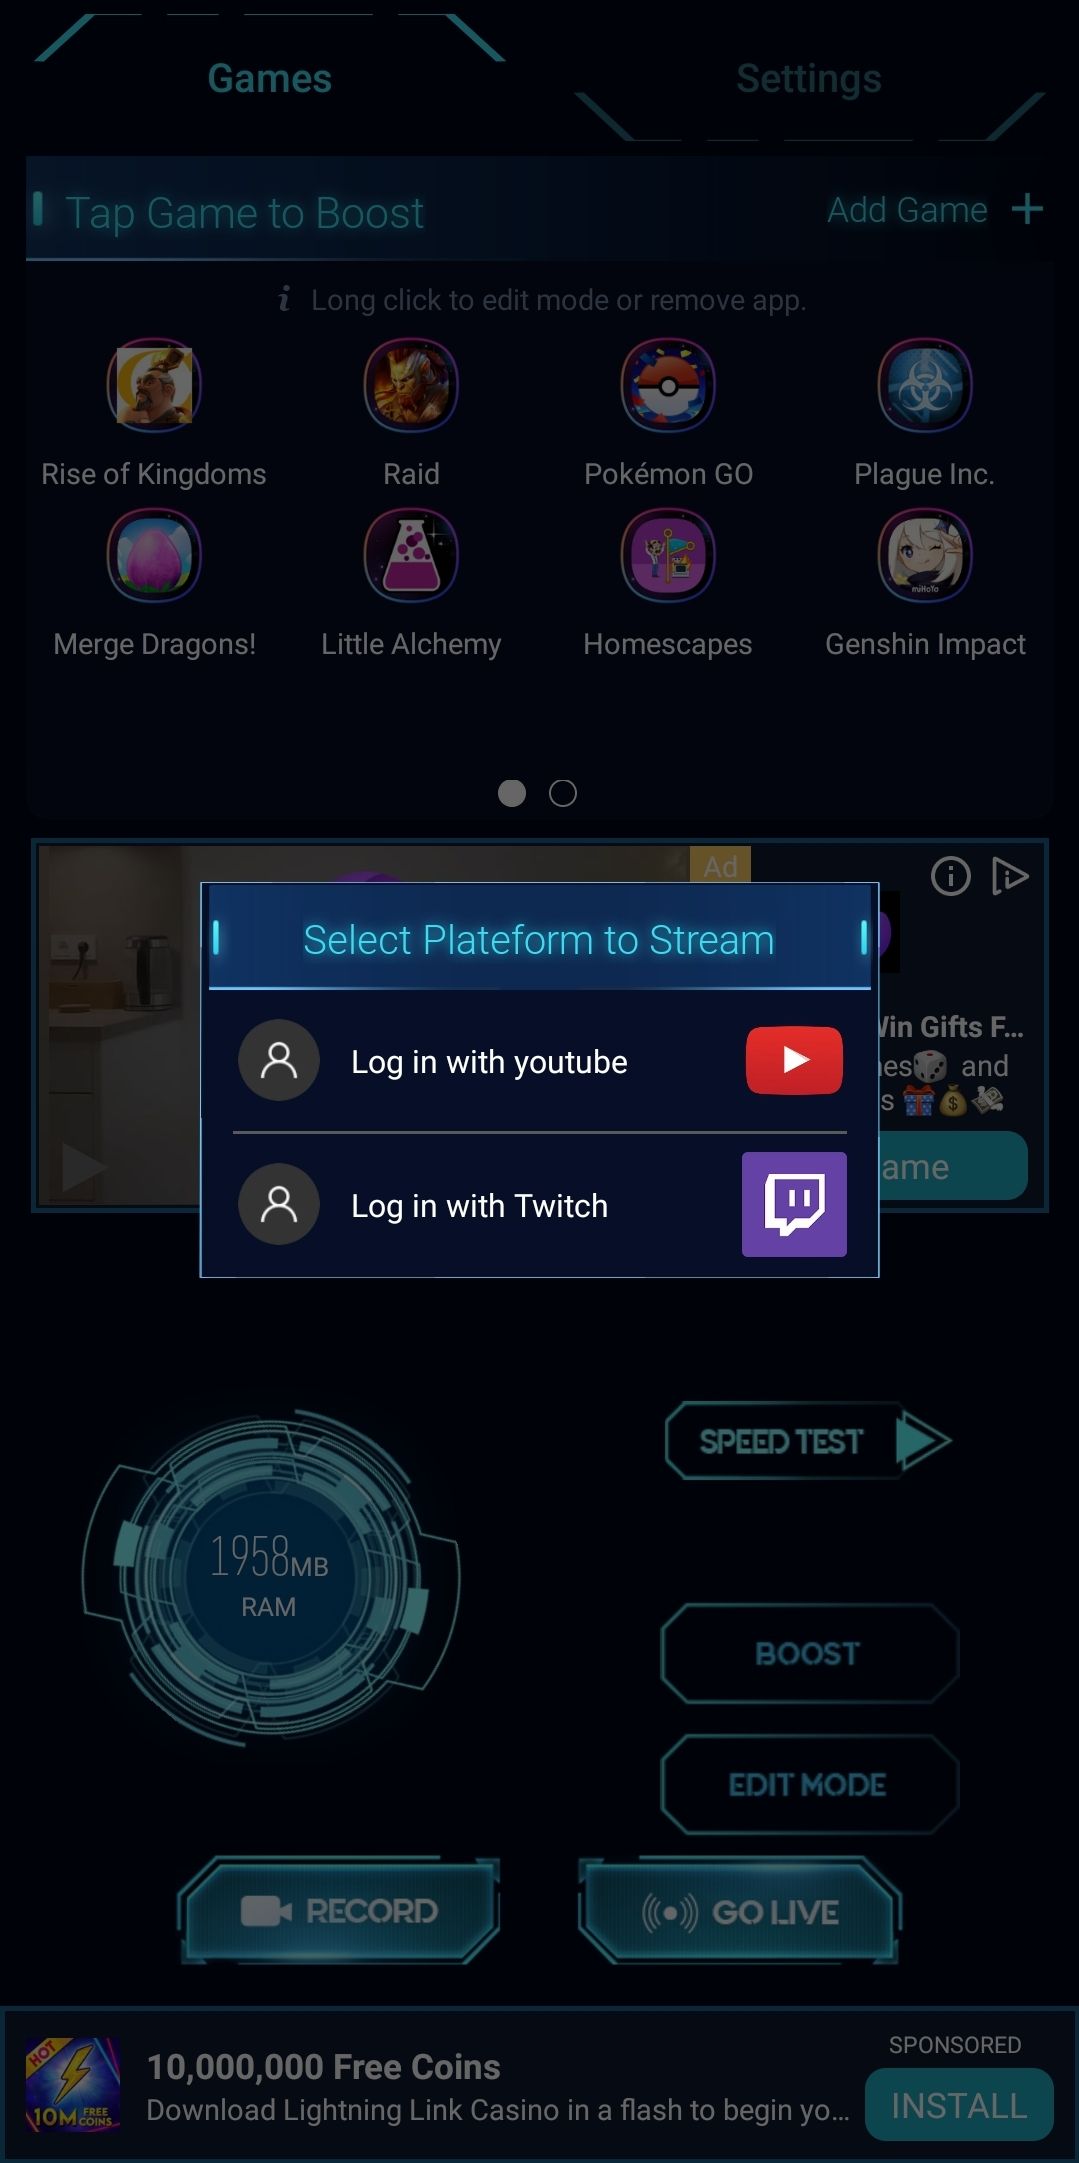 Games Booster offers a choice to stream to either YouTube or Twitch